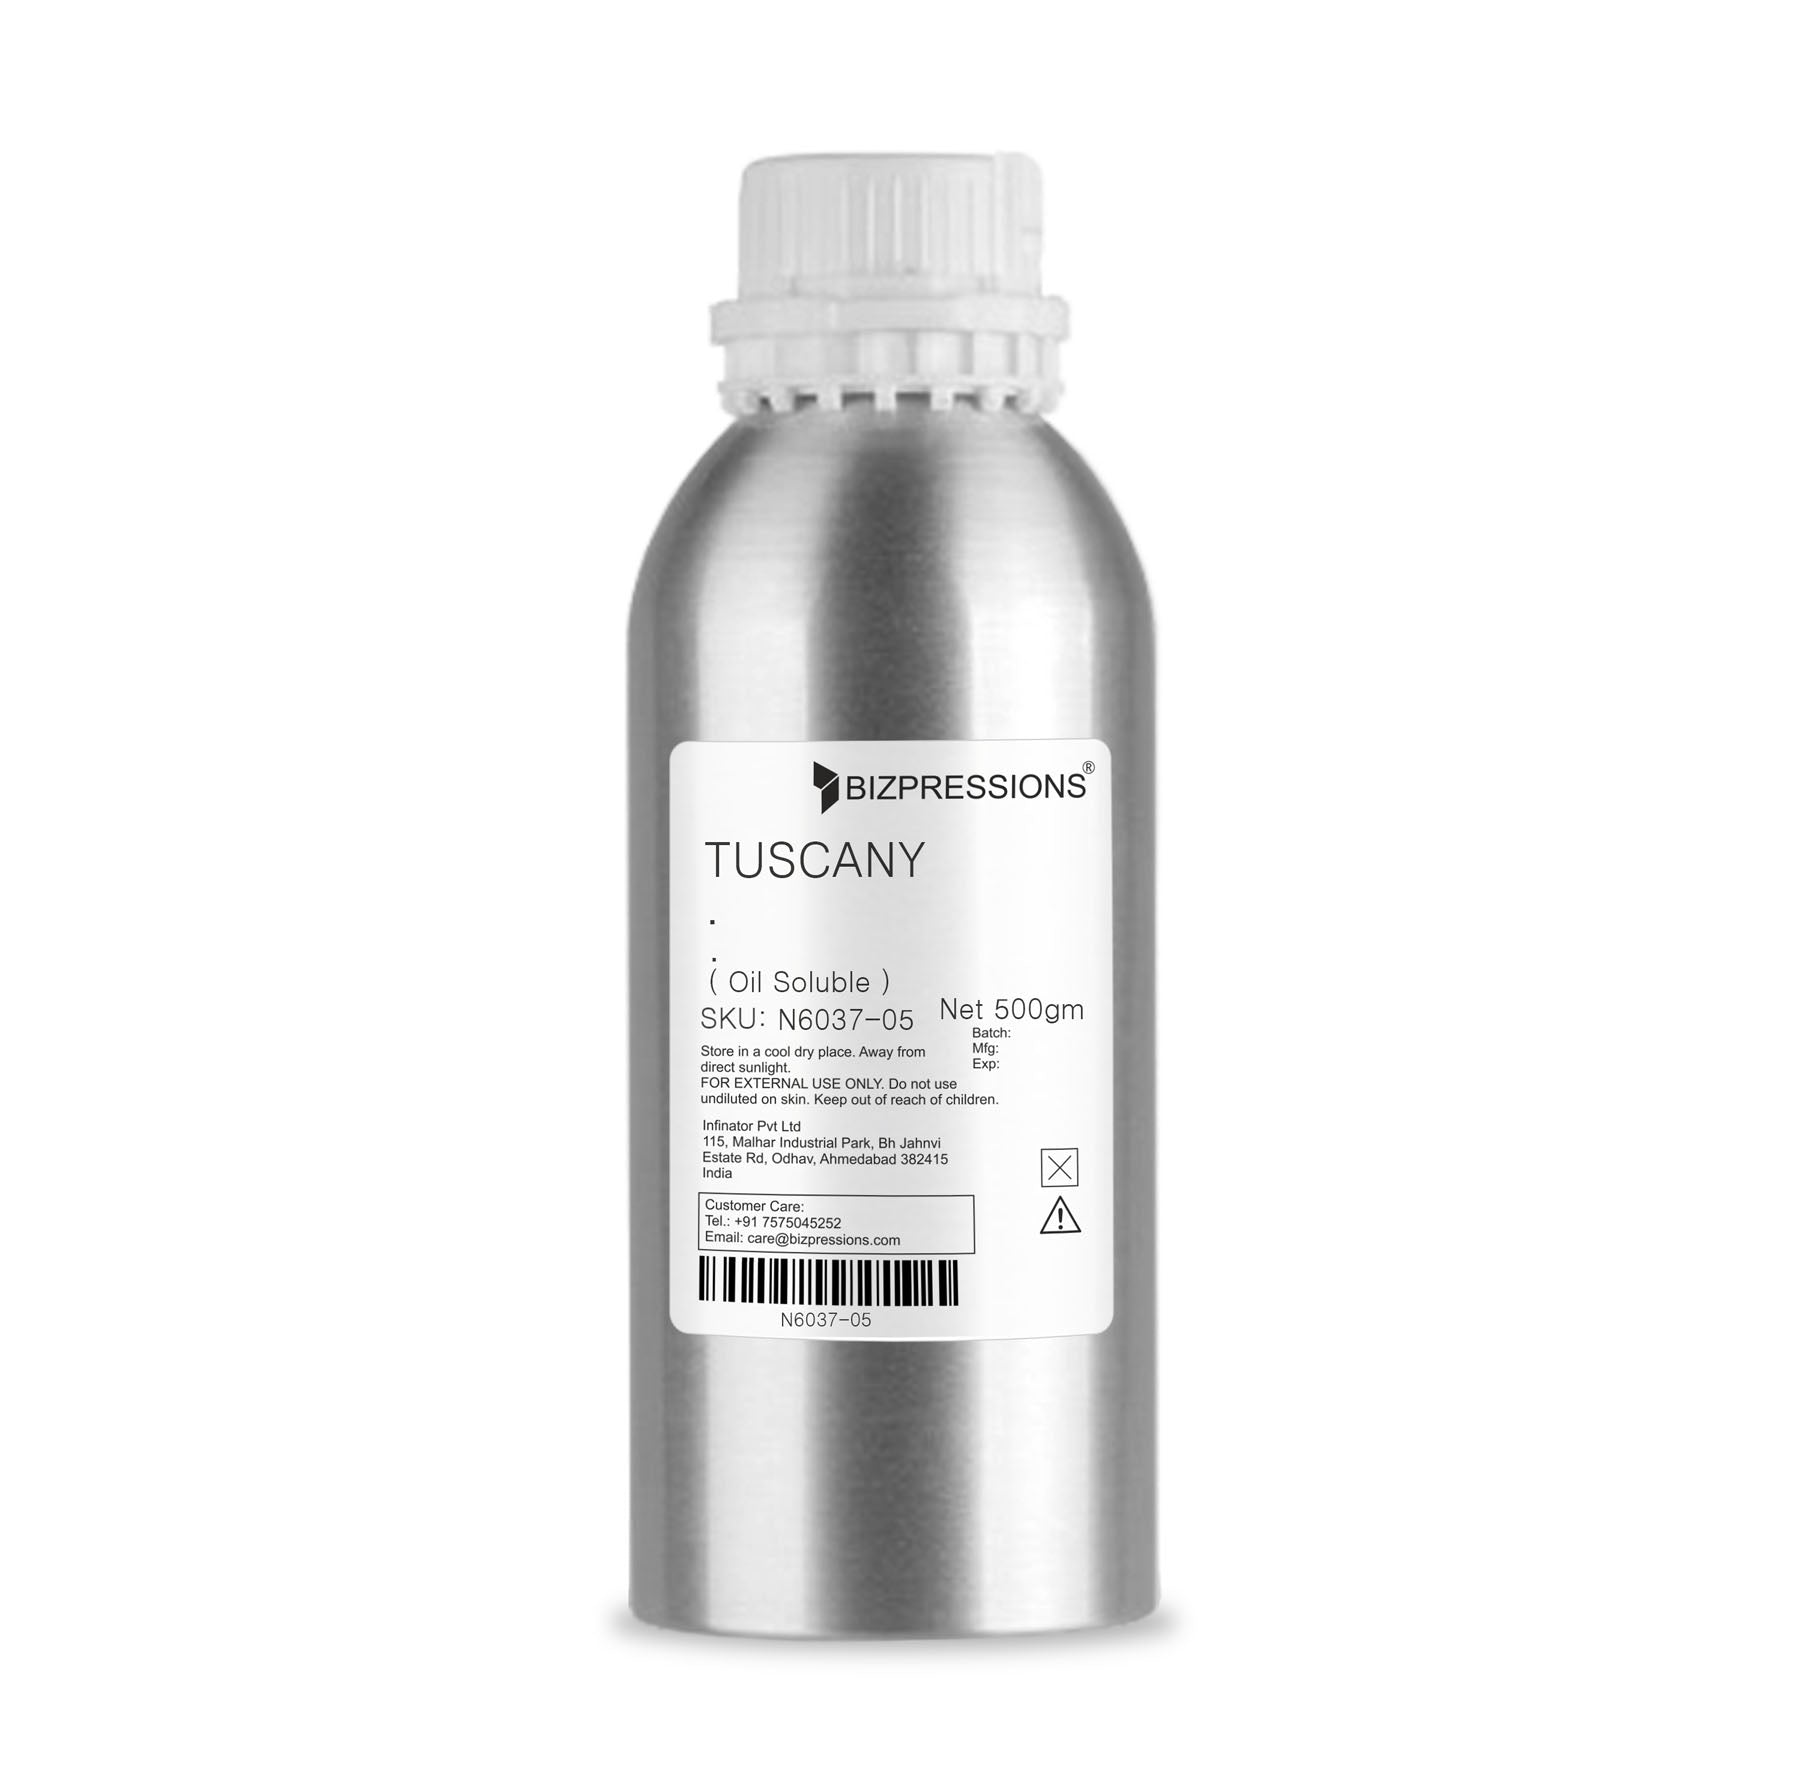 TUSCANY - Fragrance ( Oil Soluble ) - 500 gm